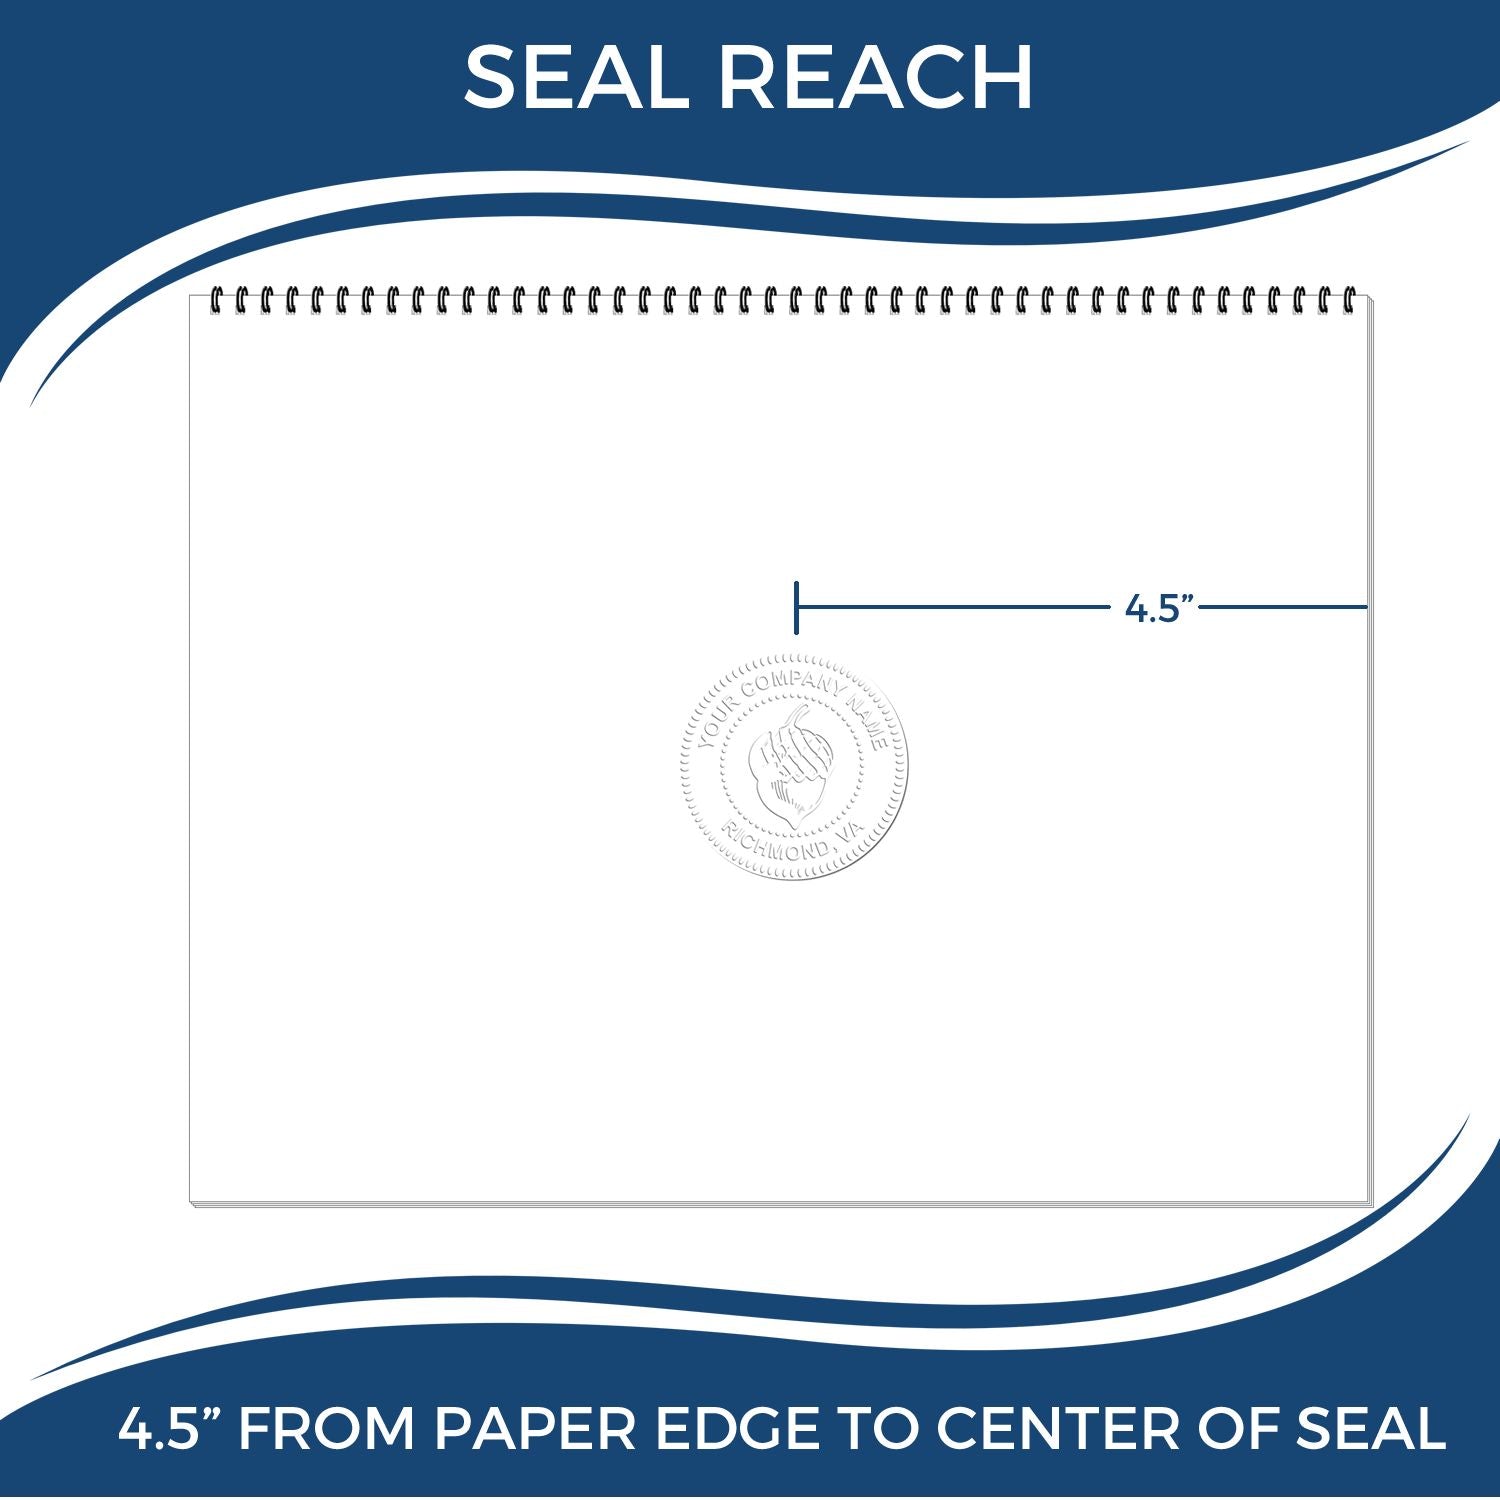 An infographic showing the seal reach which is represented by a ruler and a miniature seal image of the State of North Dakota Extended Long Reach Geologist Seal